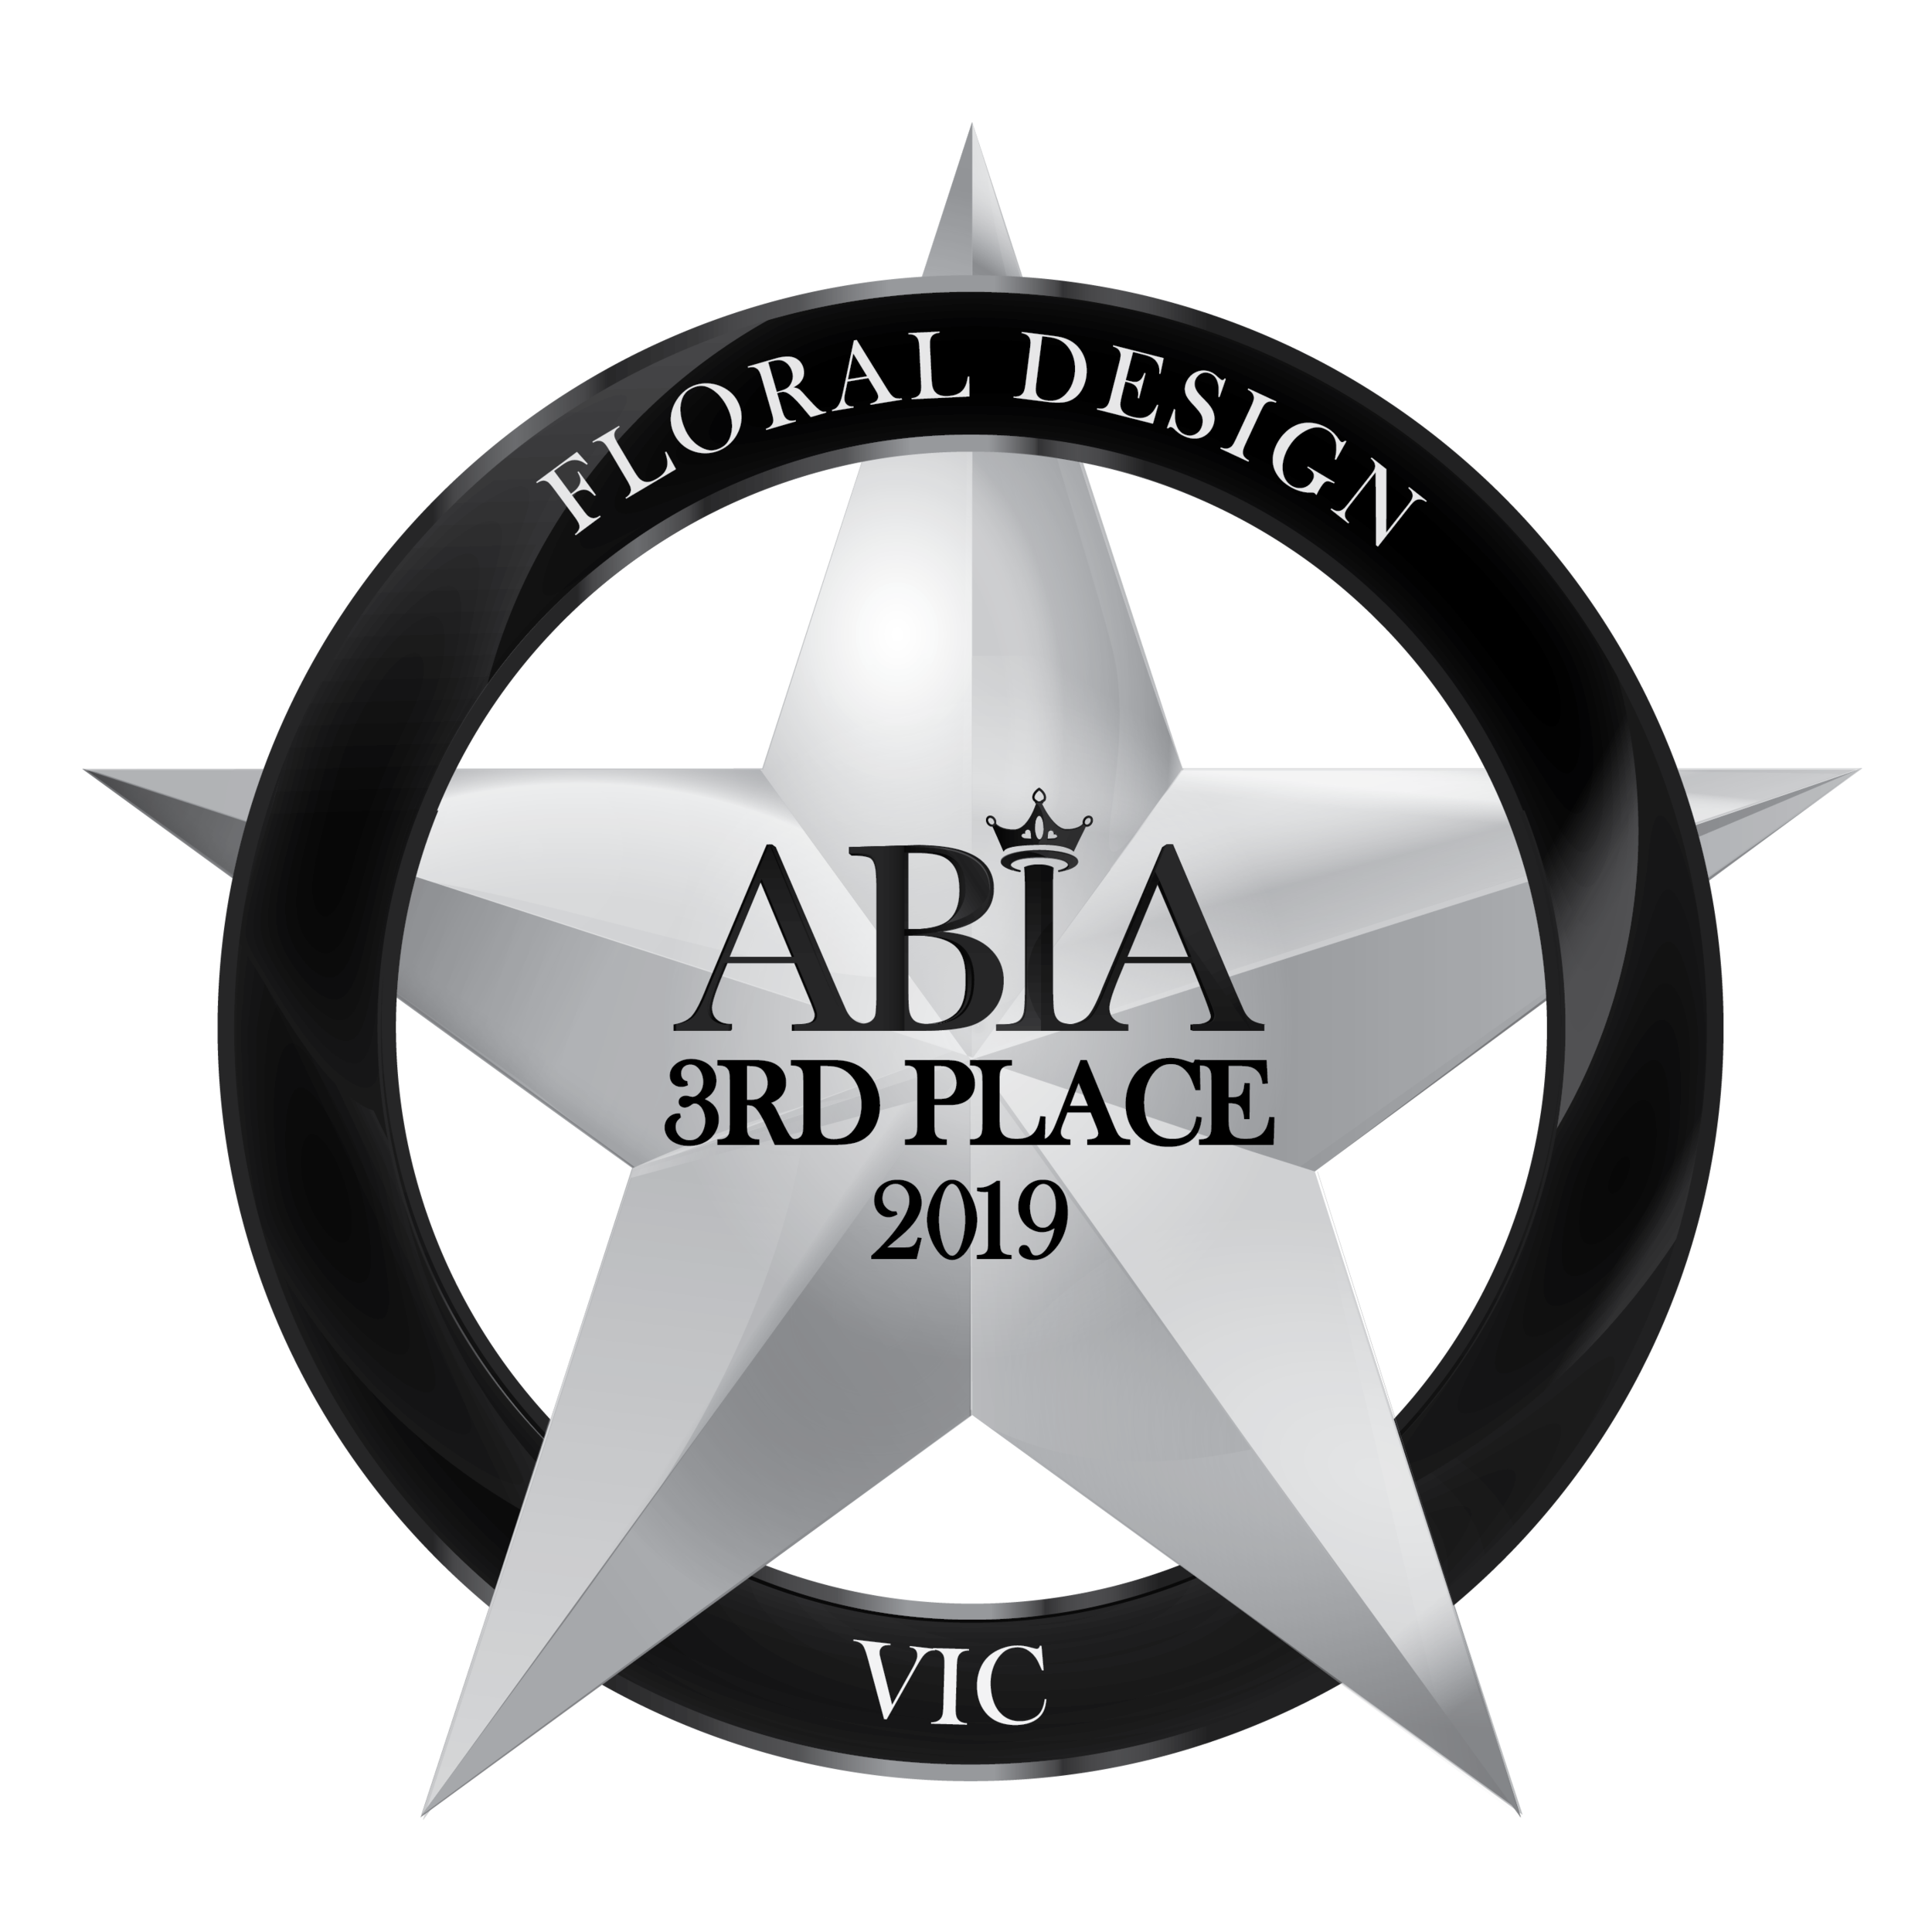 2019-VIC-ABIA-Award-Logo-FloralDesign_3RD PLACE.png